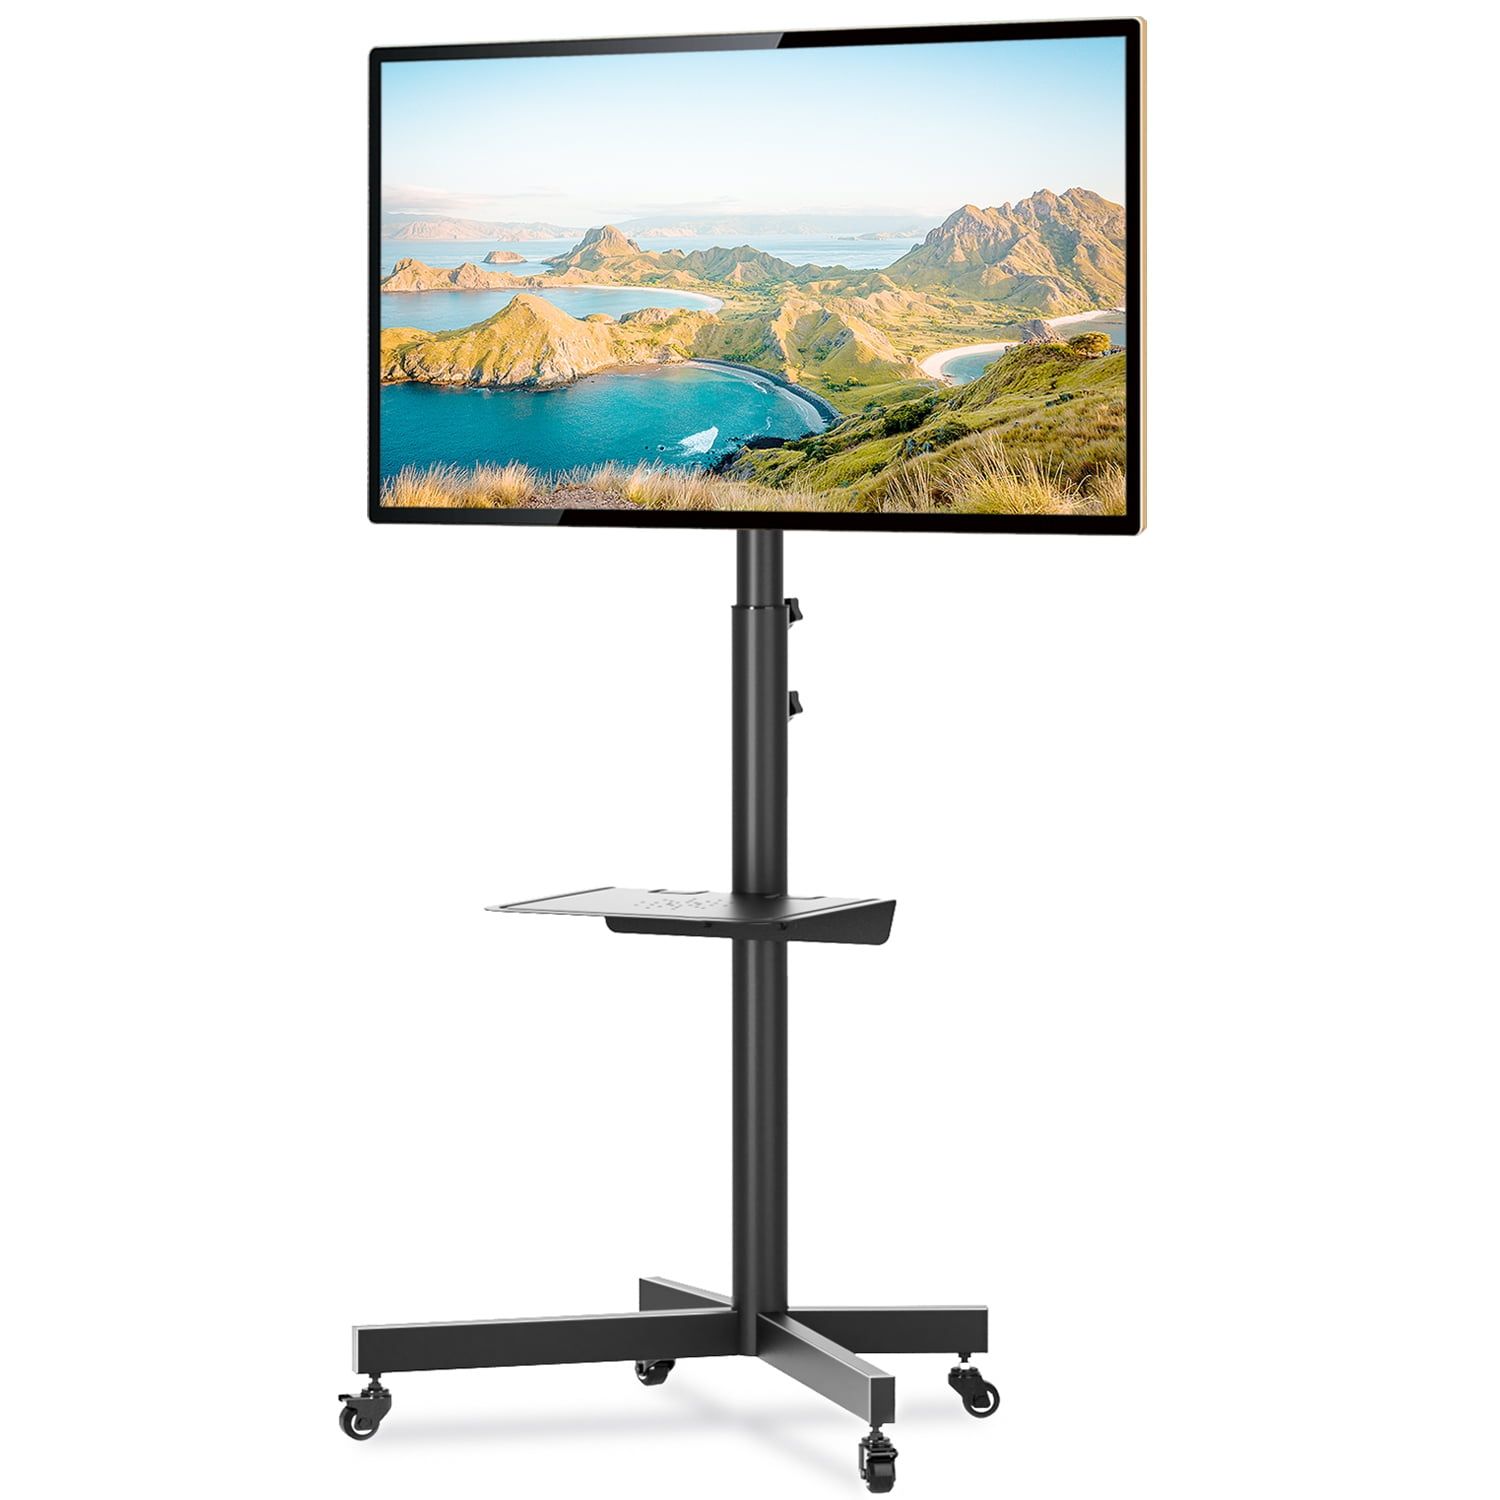 Rfiver Black Mobile Tv Cart Rolling Stand With Mount For 32" To 60 Pertaining To Mobile Tilt Rolling Tv Stands (Gallery 6 of 20)